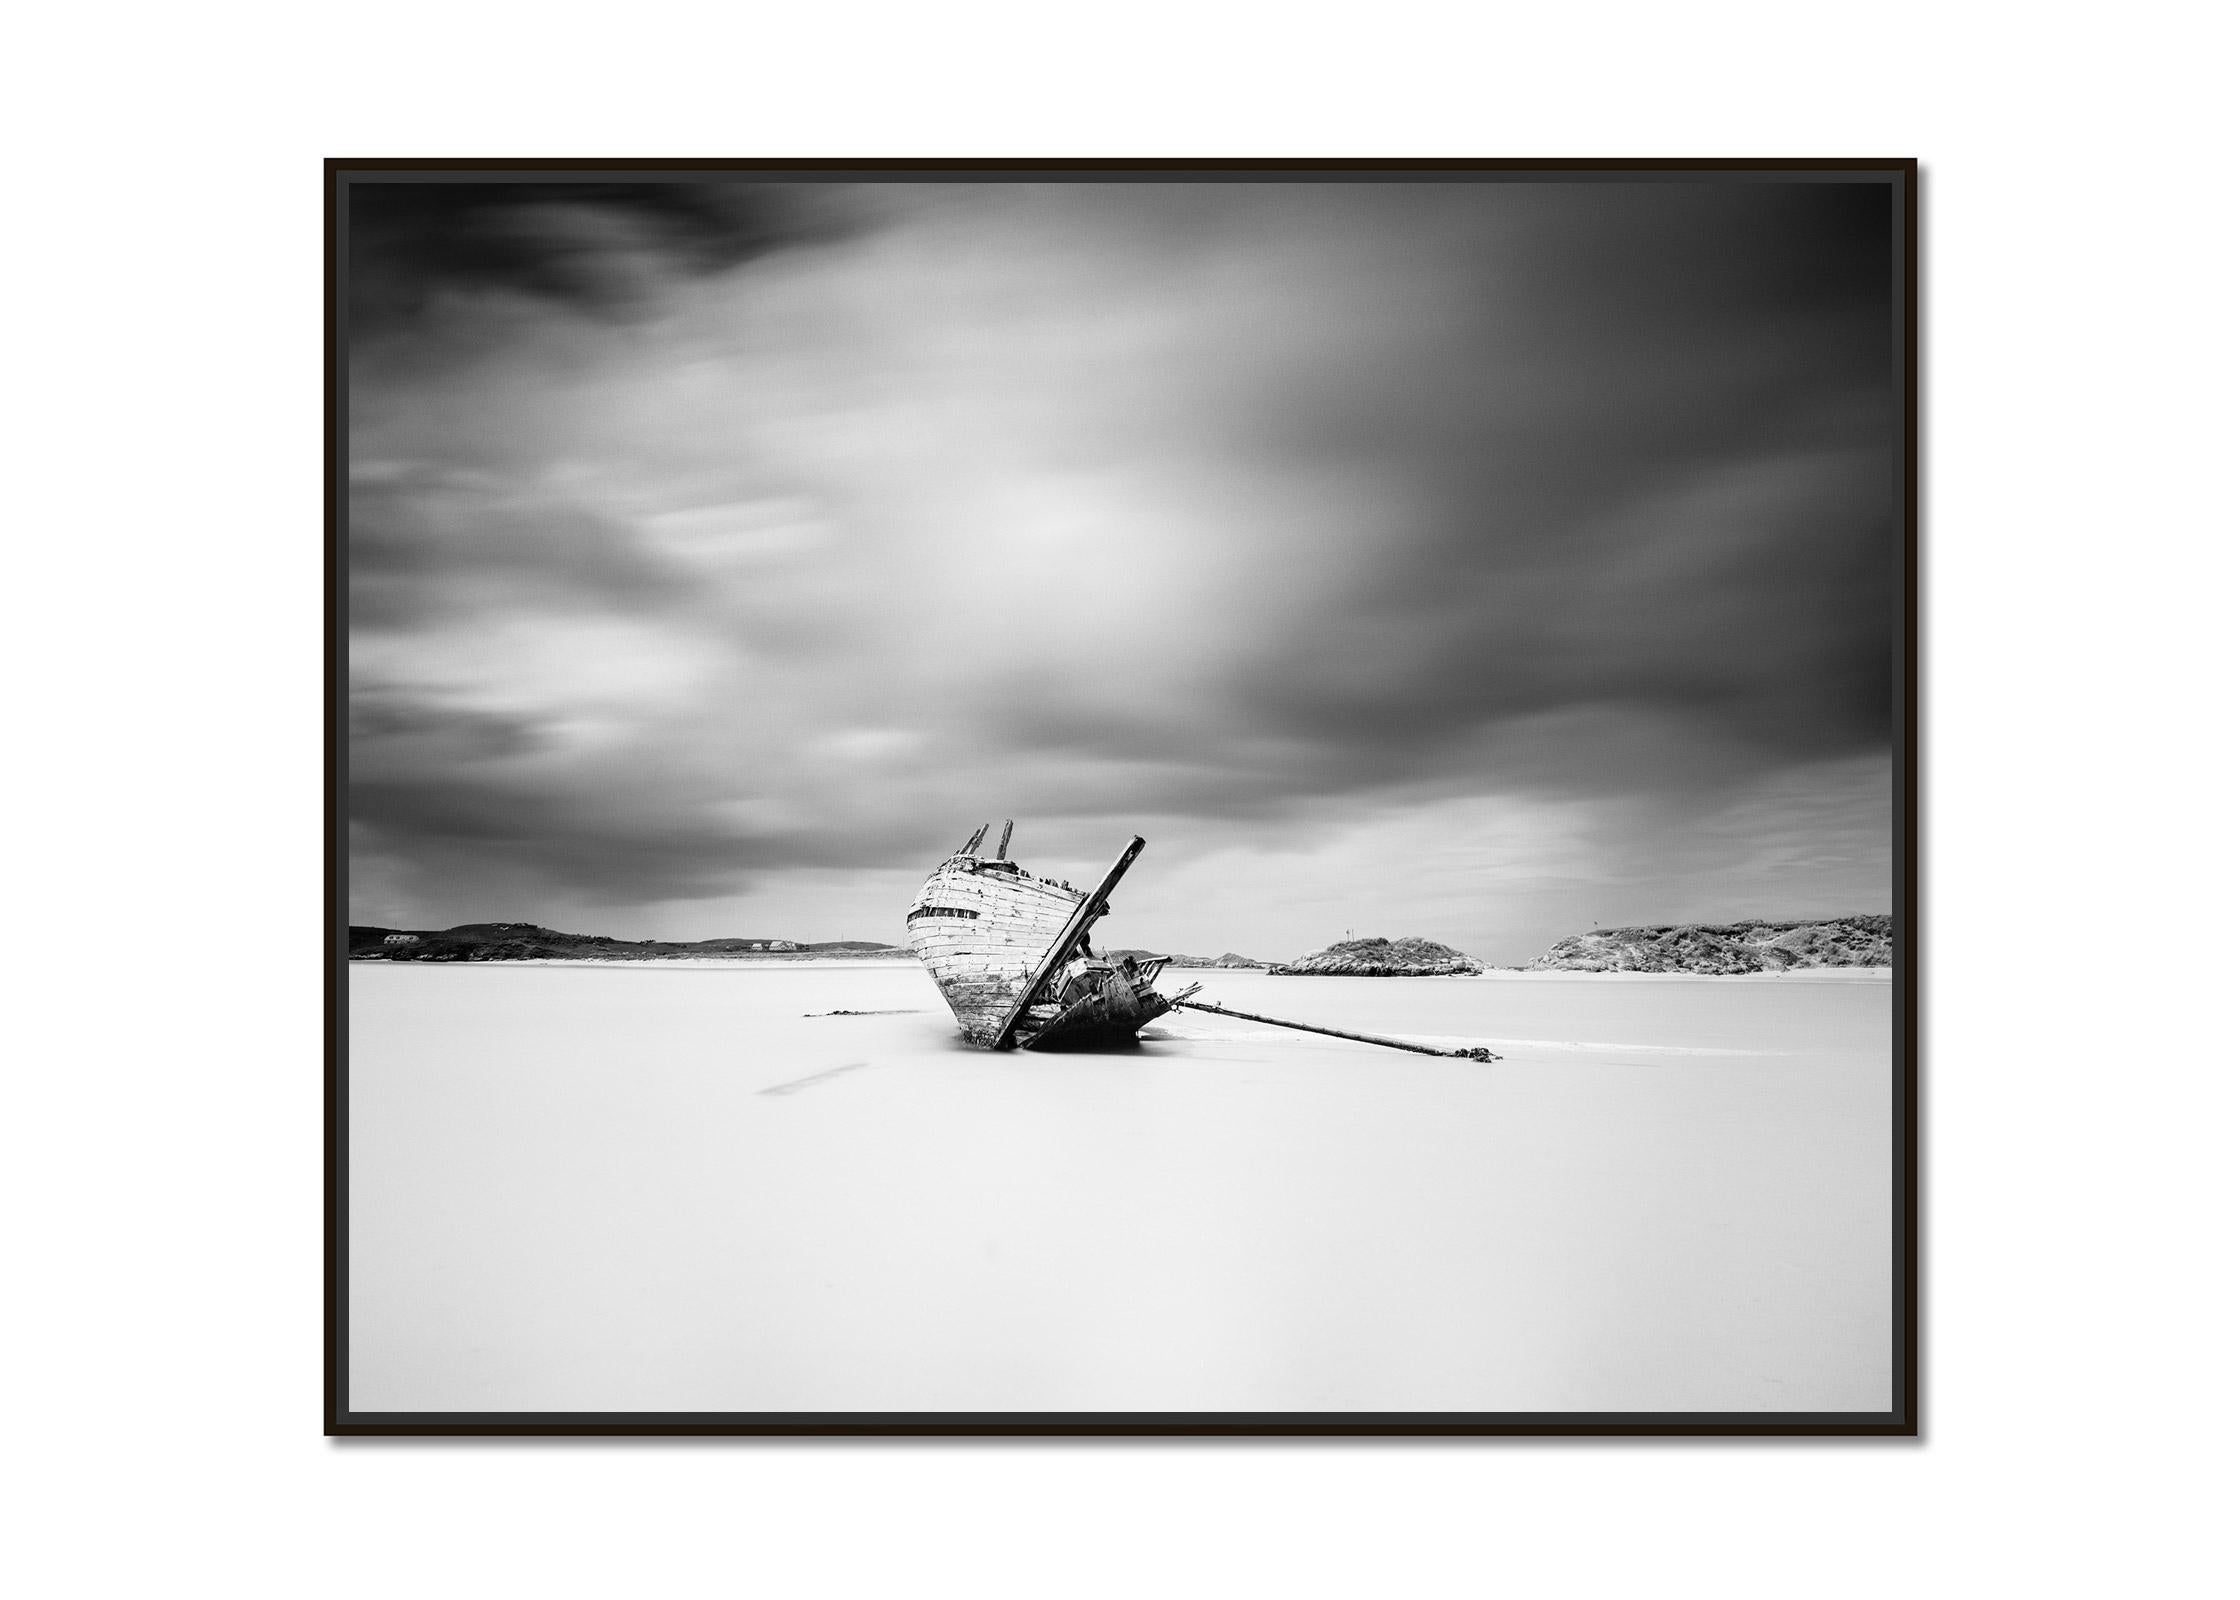 Bad Eddies Boat, Ireland, minimalist black and white art landscape photography - Contemporary Photograph by Gerald Berghammer